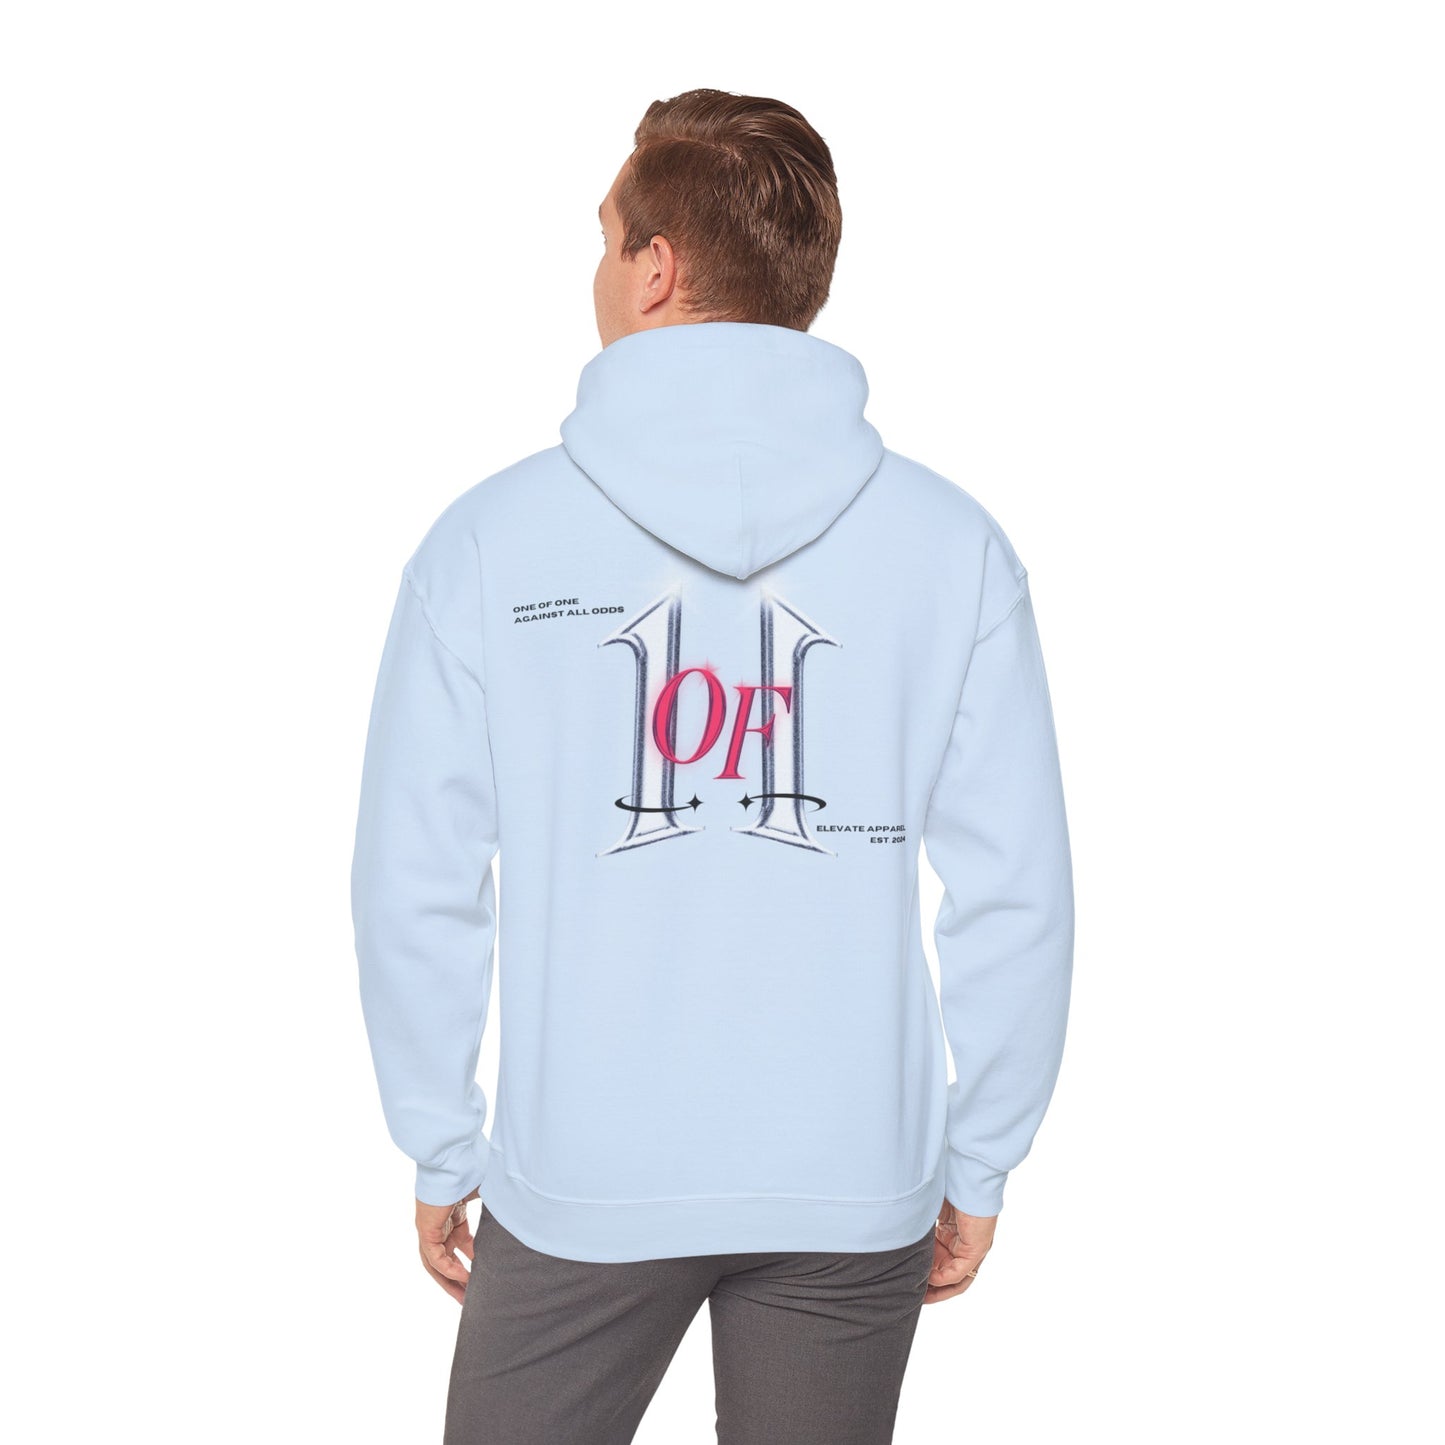 "1of1" Graphic Hoodie